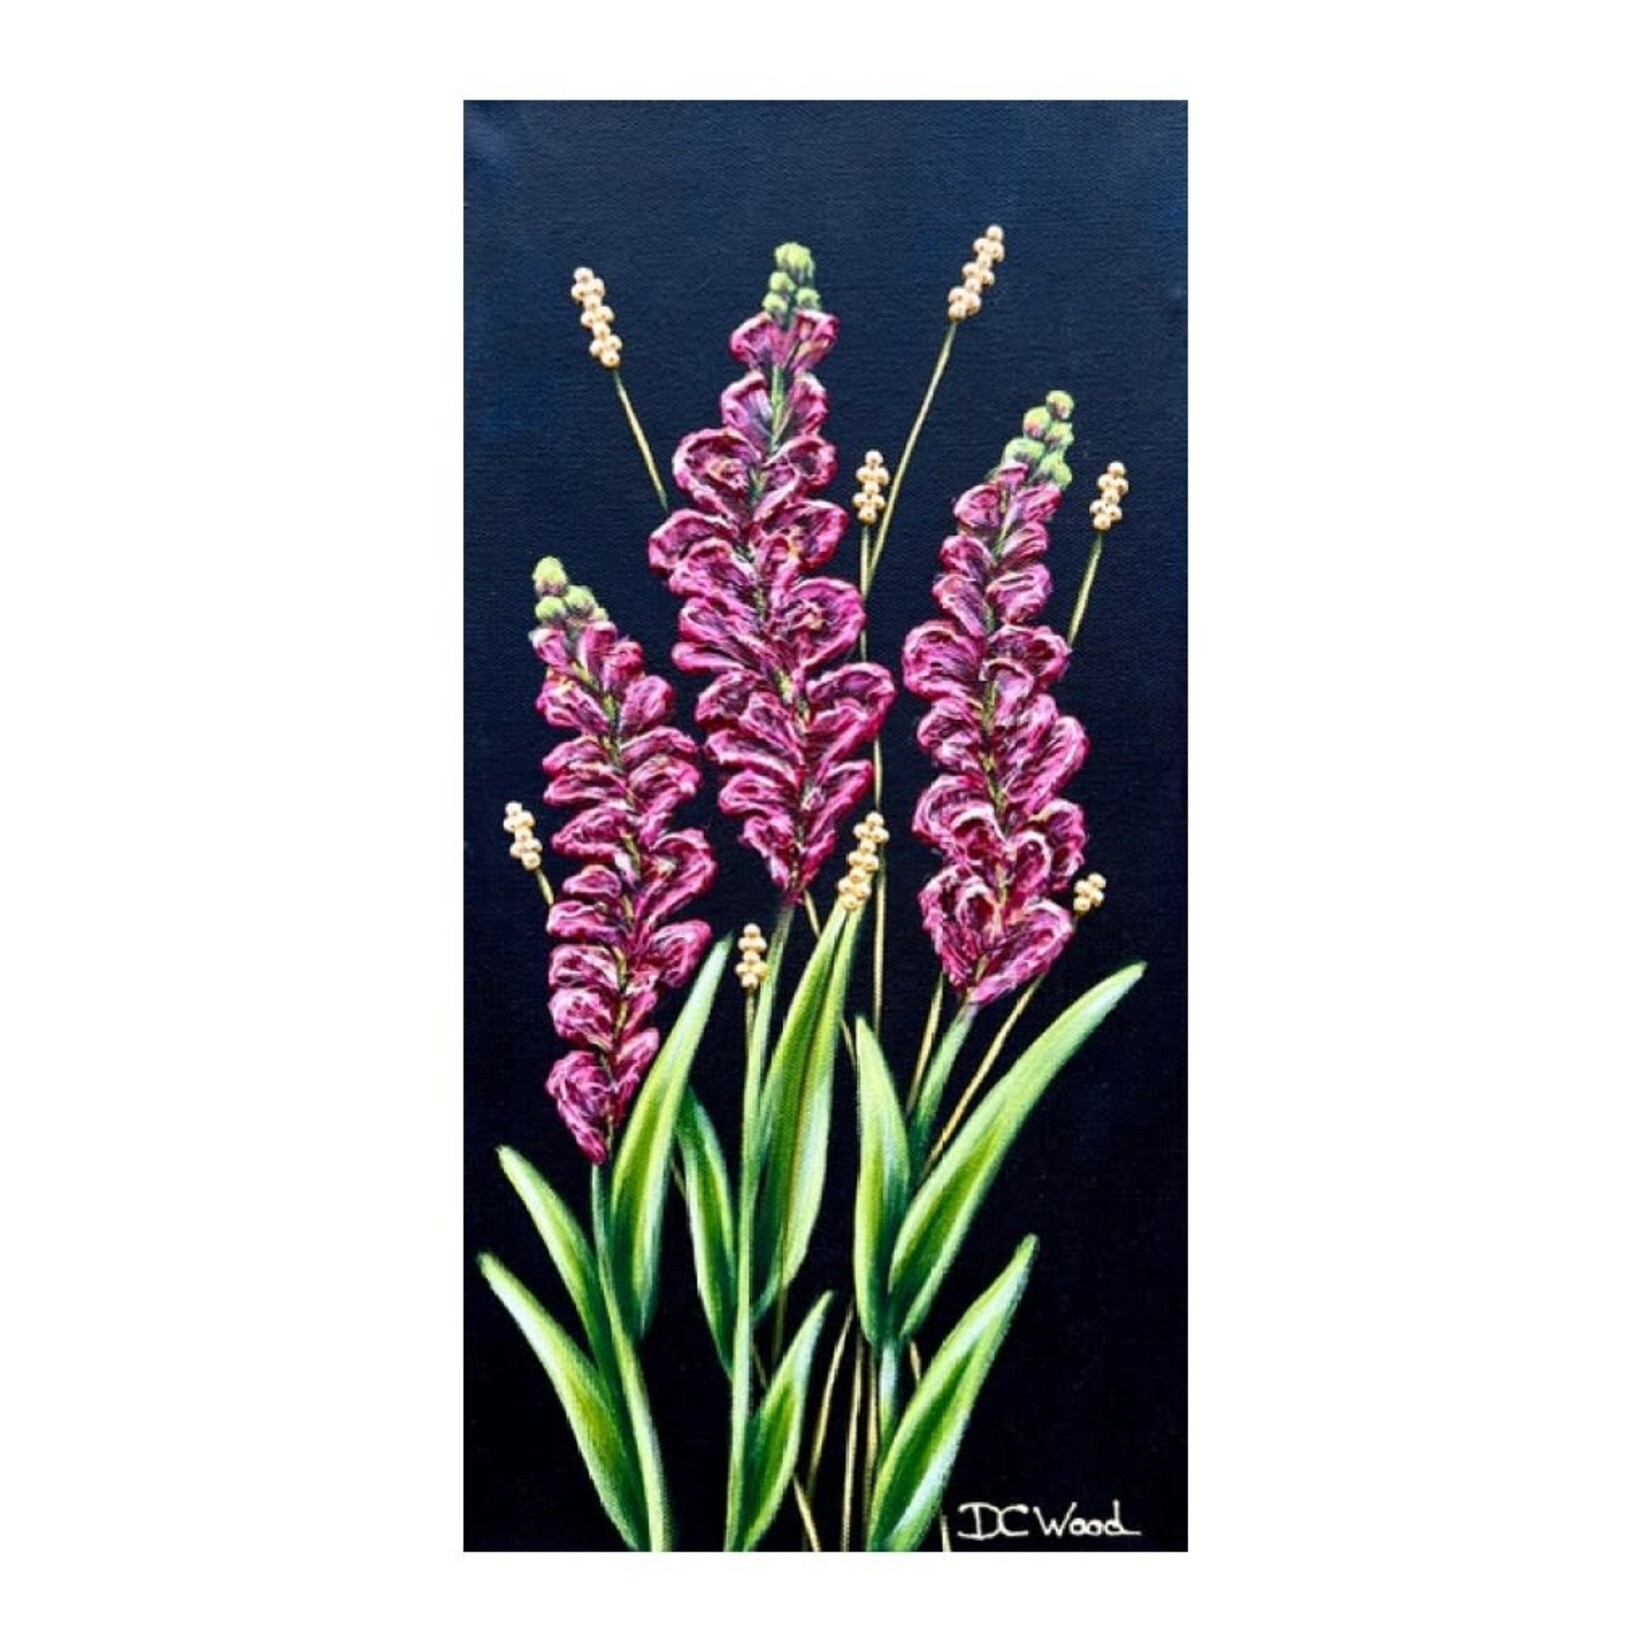 Denise Cassidy Wood Collection Snapdragons Pink 16x8 - Denise Cassidy Wood Original